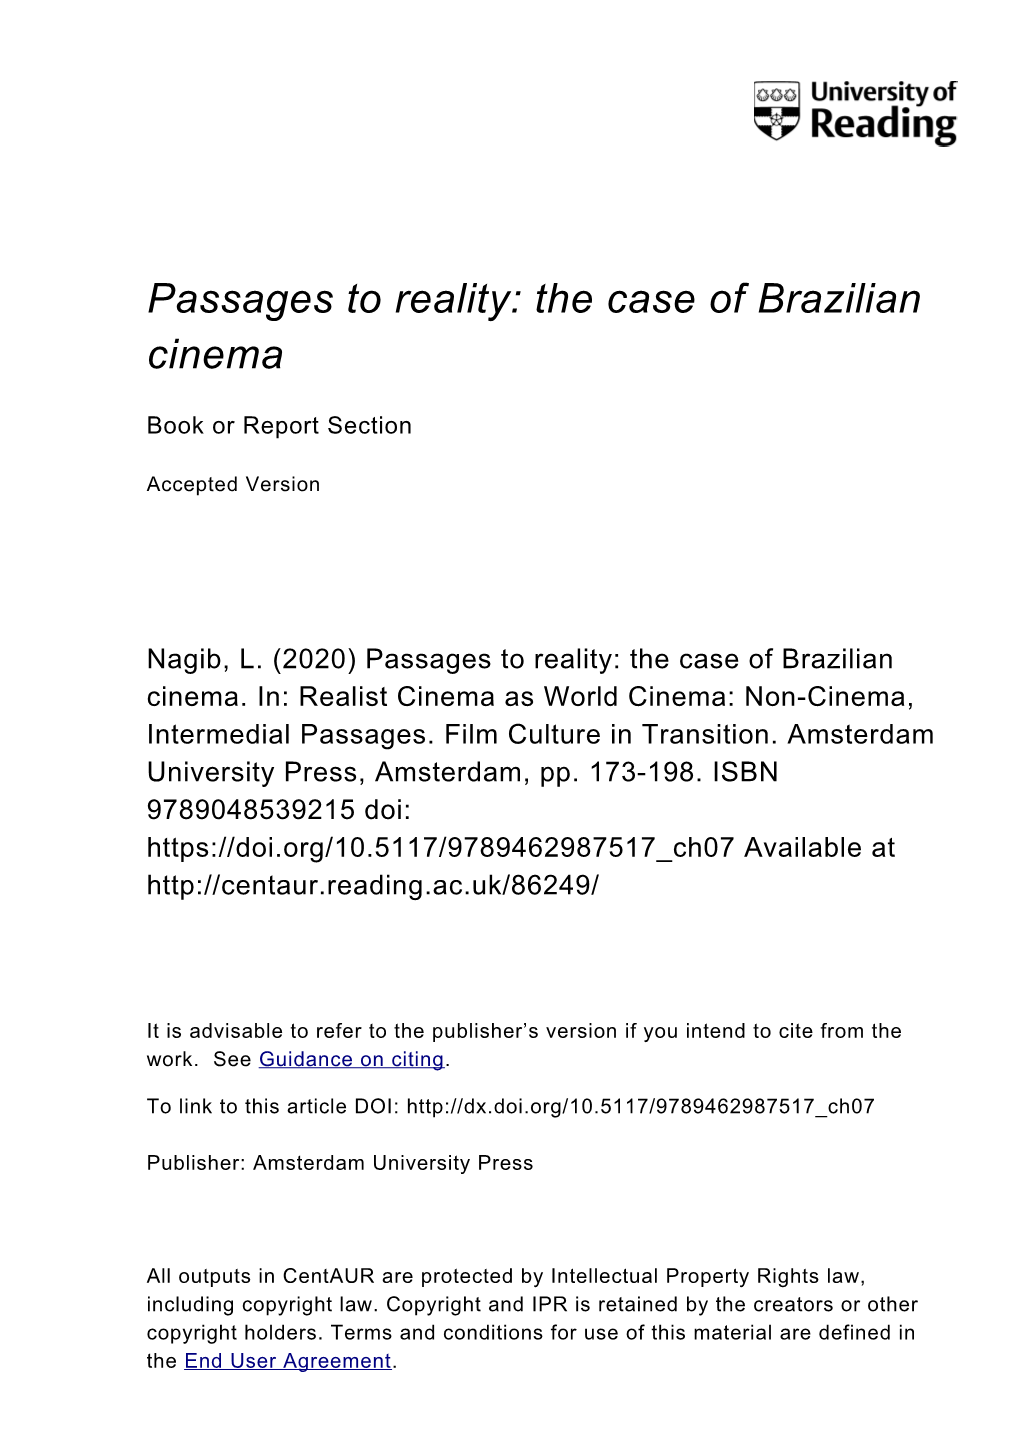 Passages to Reality: the Case of Brazilian Cinema